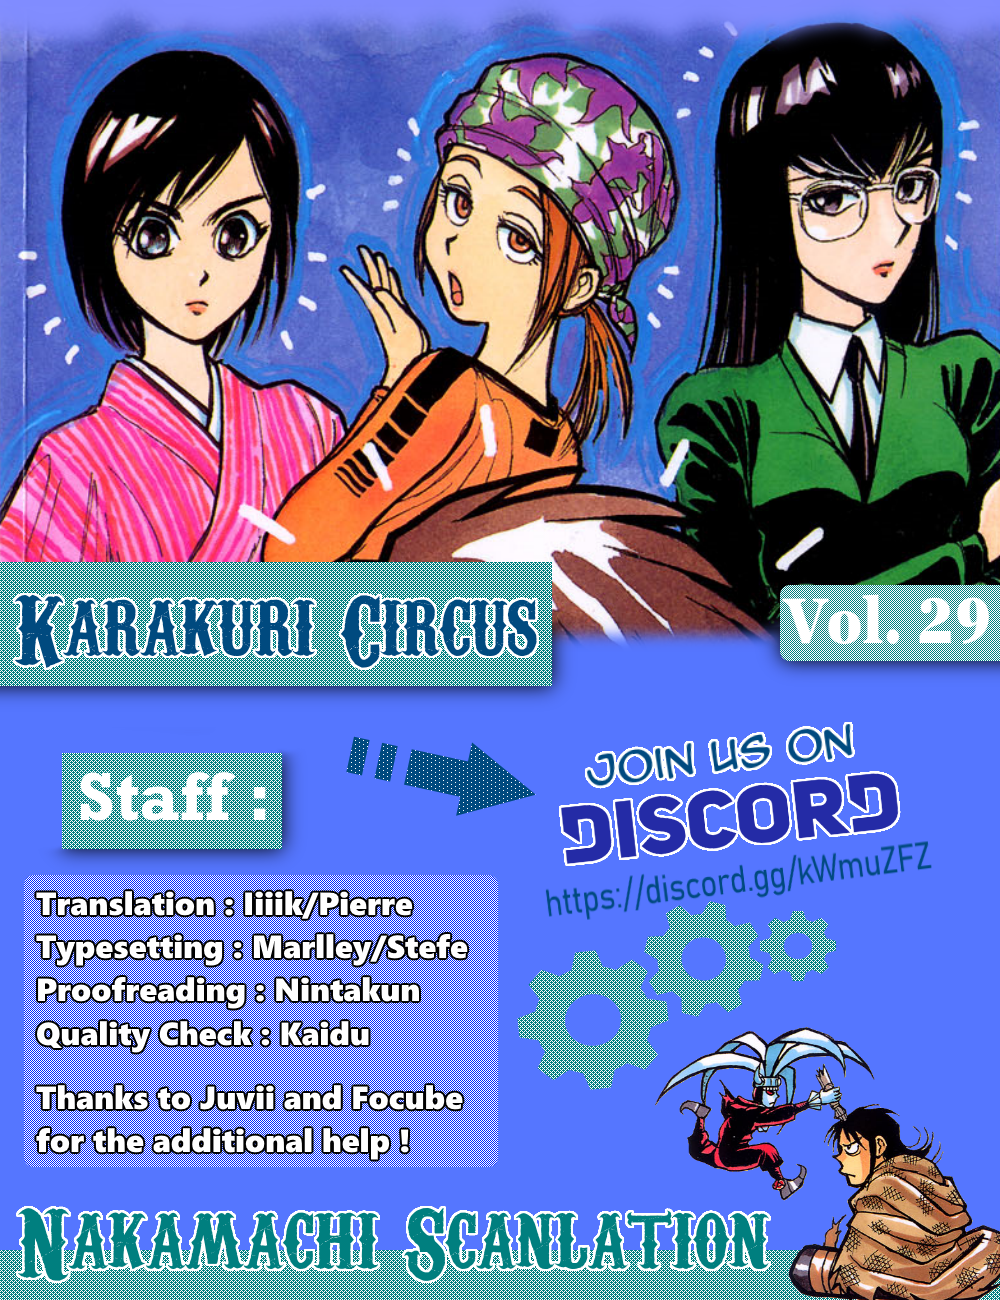 Karakuri Circus Chapter 280: Main Part - Reunion - Act 2: At The Sea, Late In The Night - Picture 1